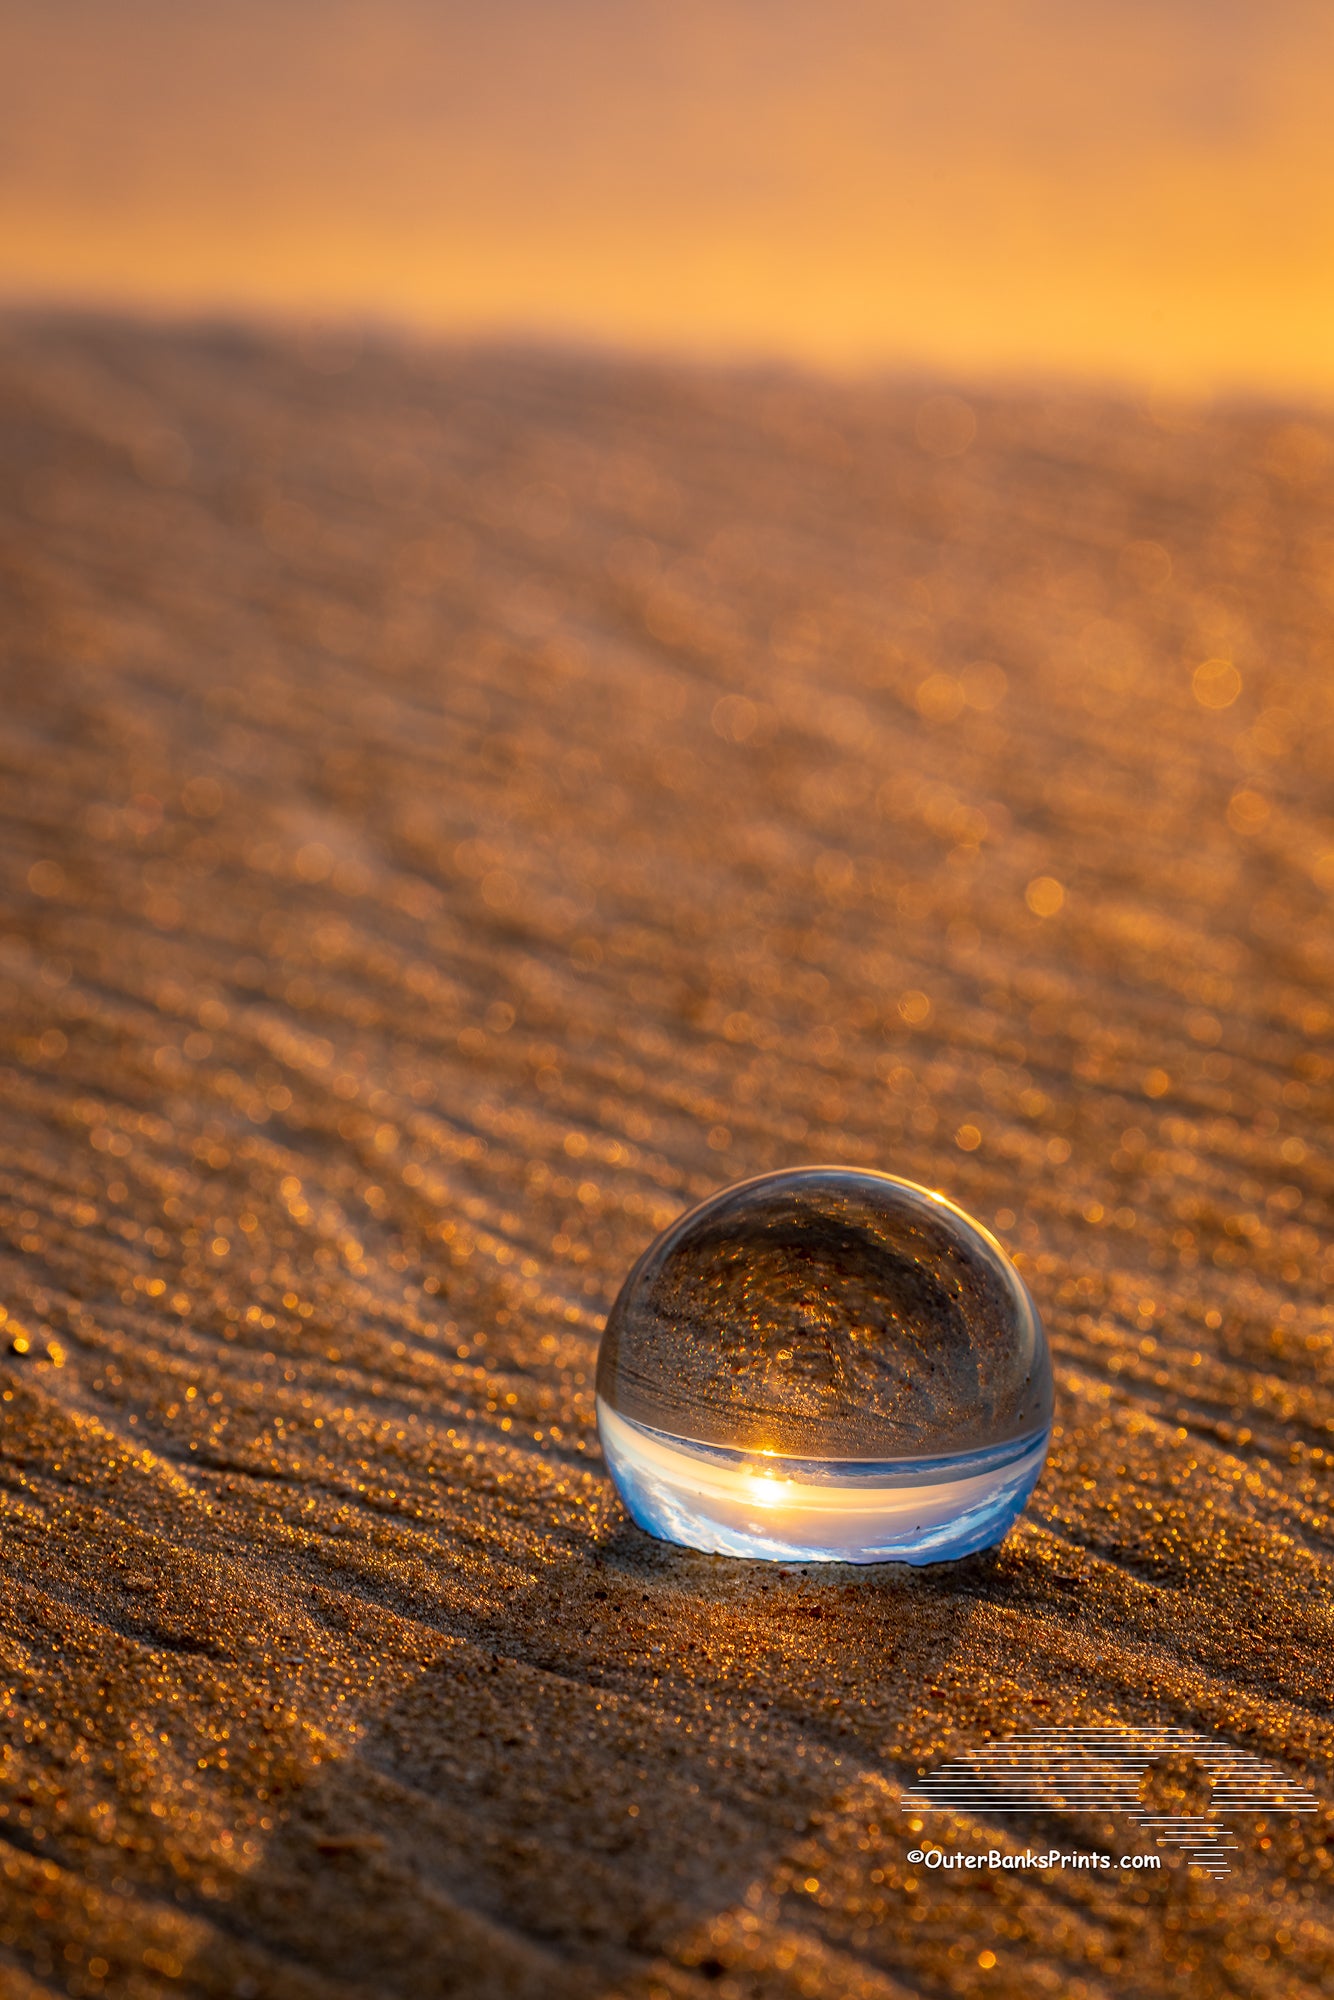 The last photo of this crystal ball at Coquina Beach, South of Nags Head before the surf took it out to sea. In the future it should make an awesome piece of Seaglass for the person lucky enough to find it!